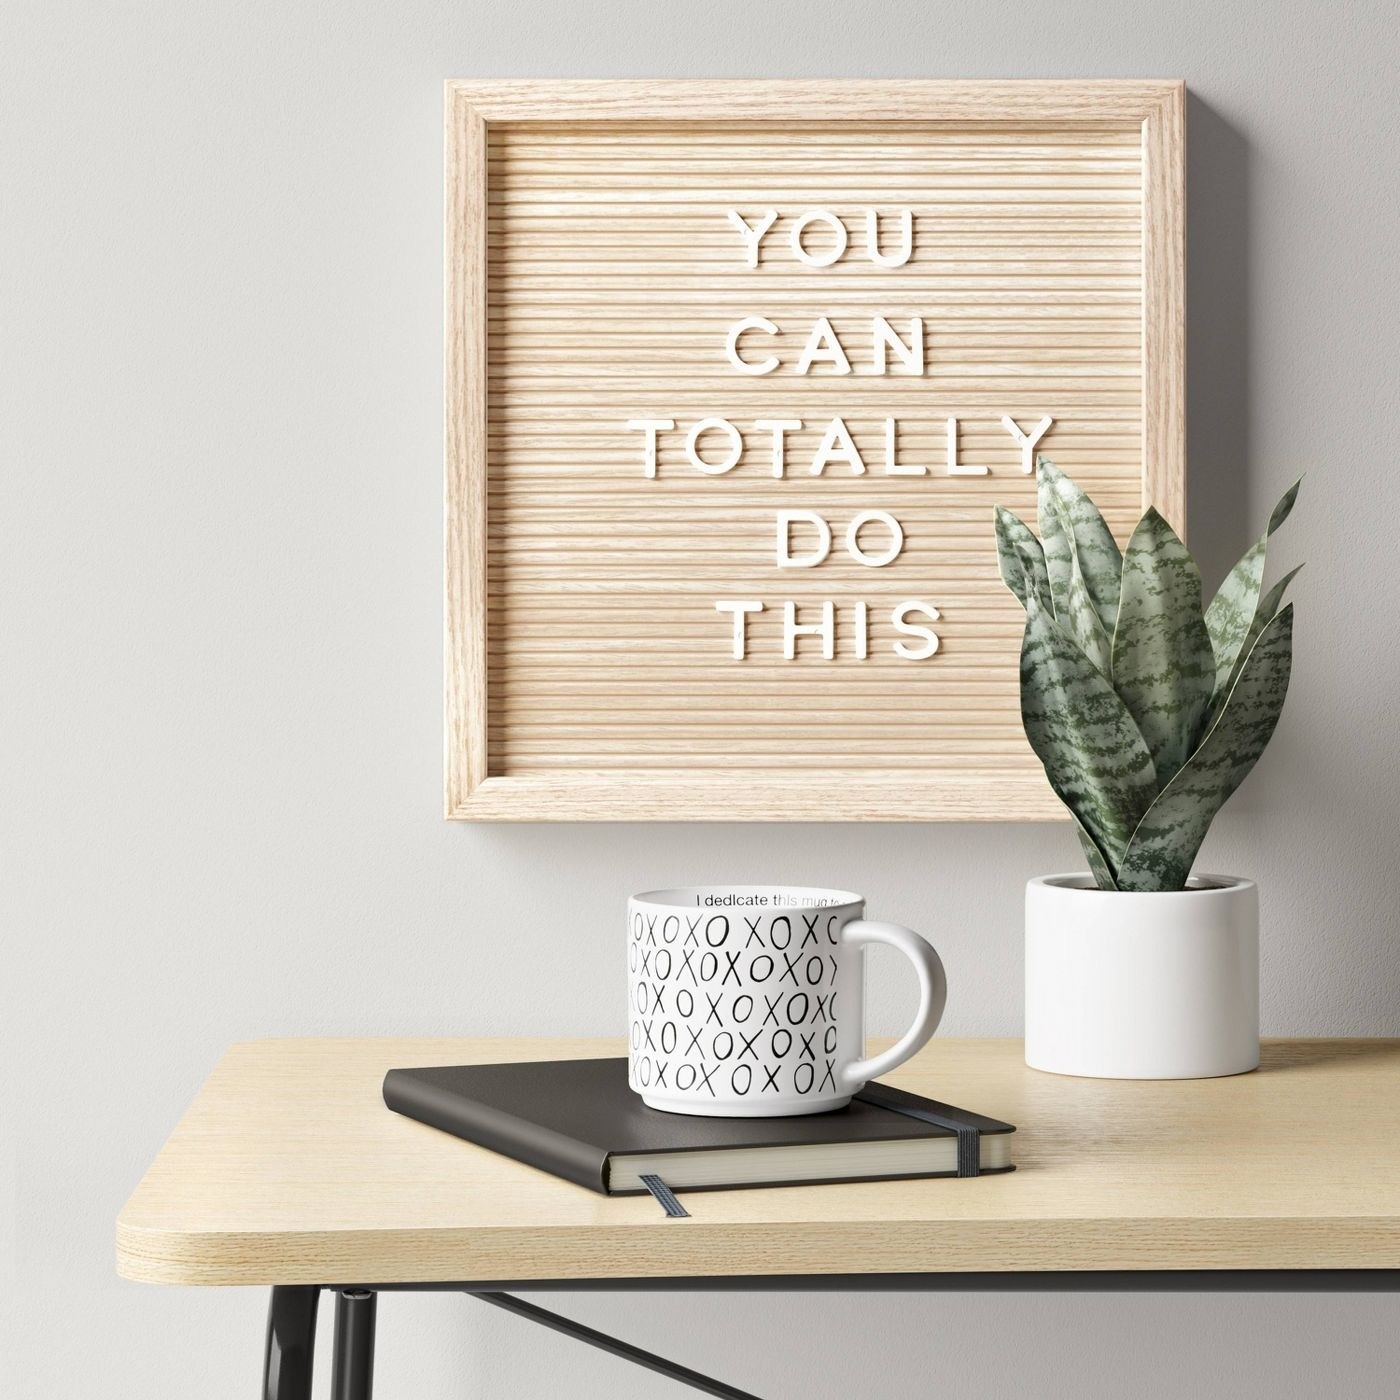 A square faux wood letter board hanging above a desk